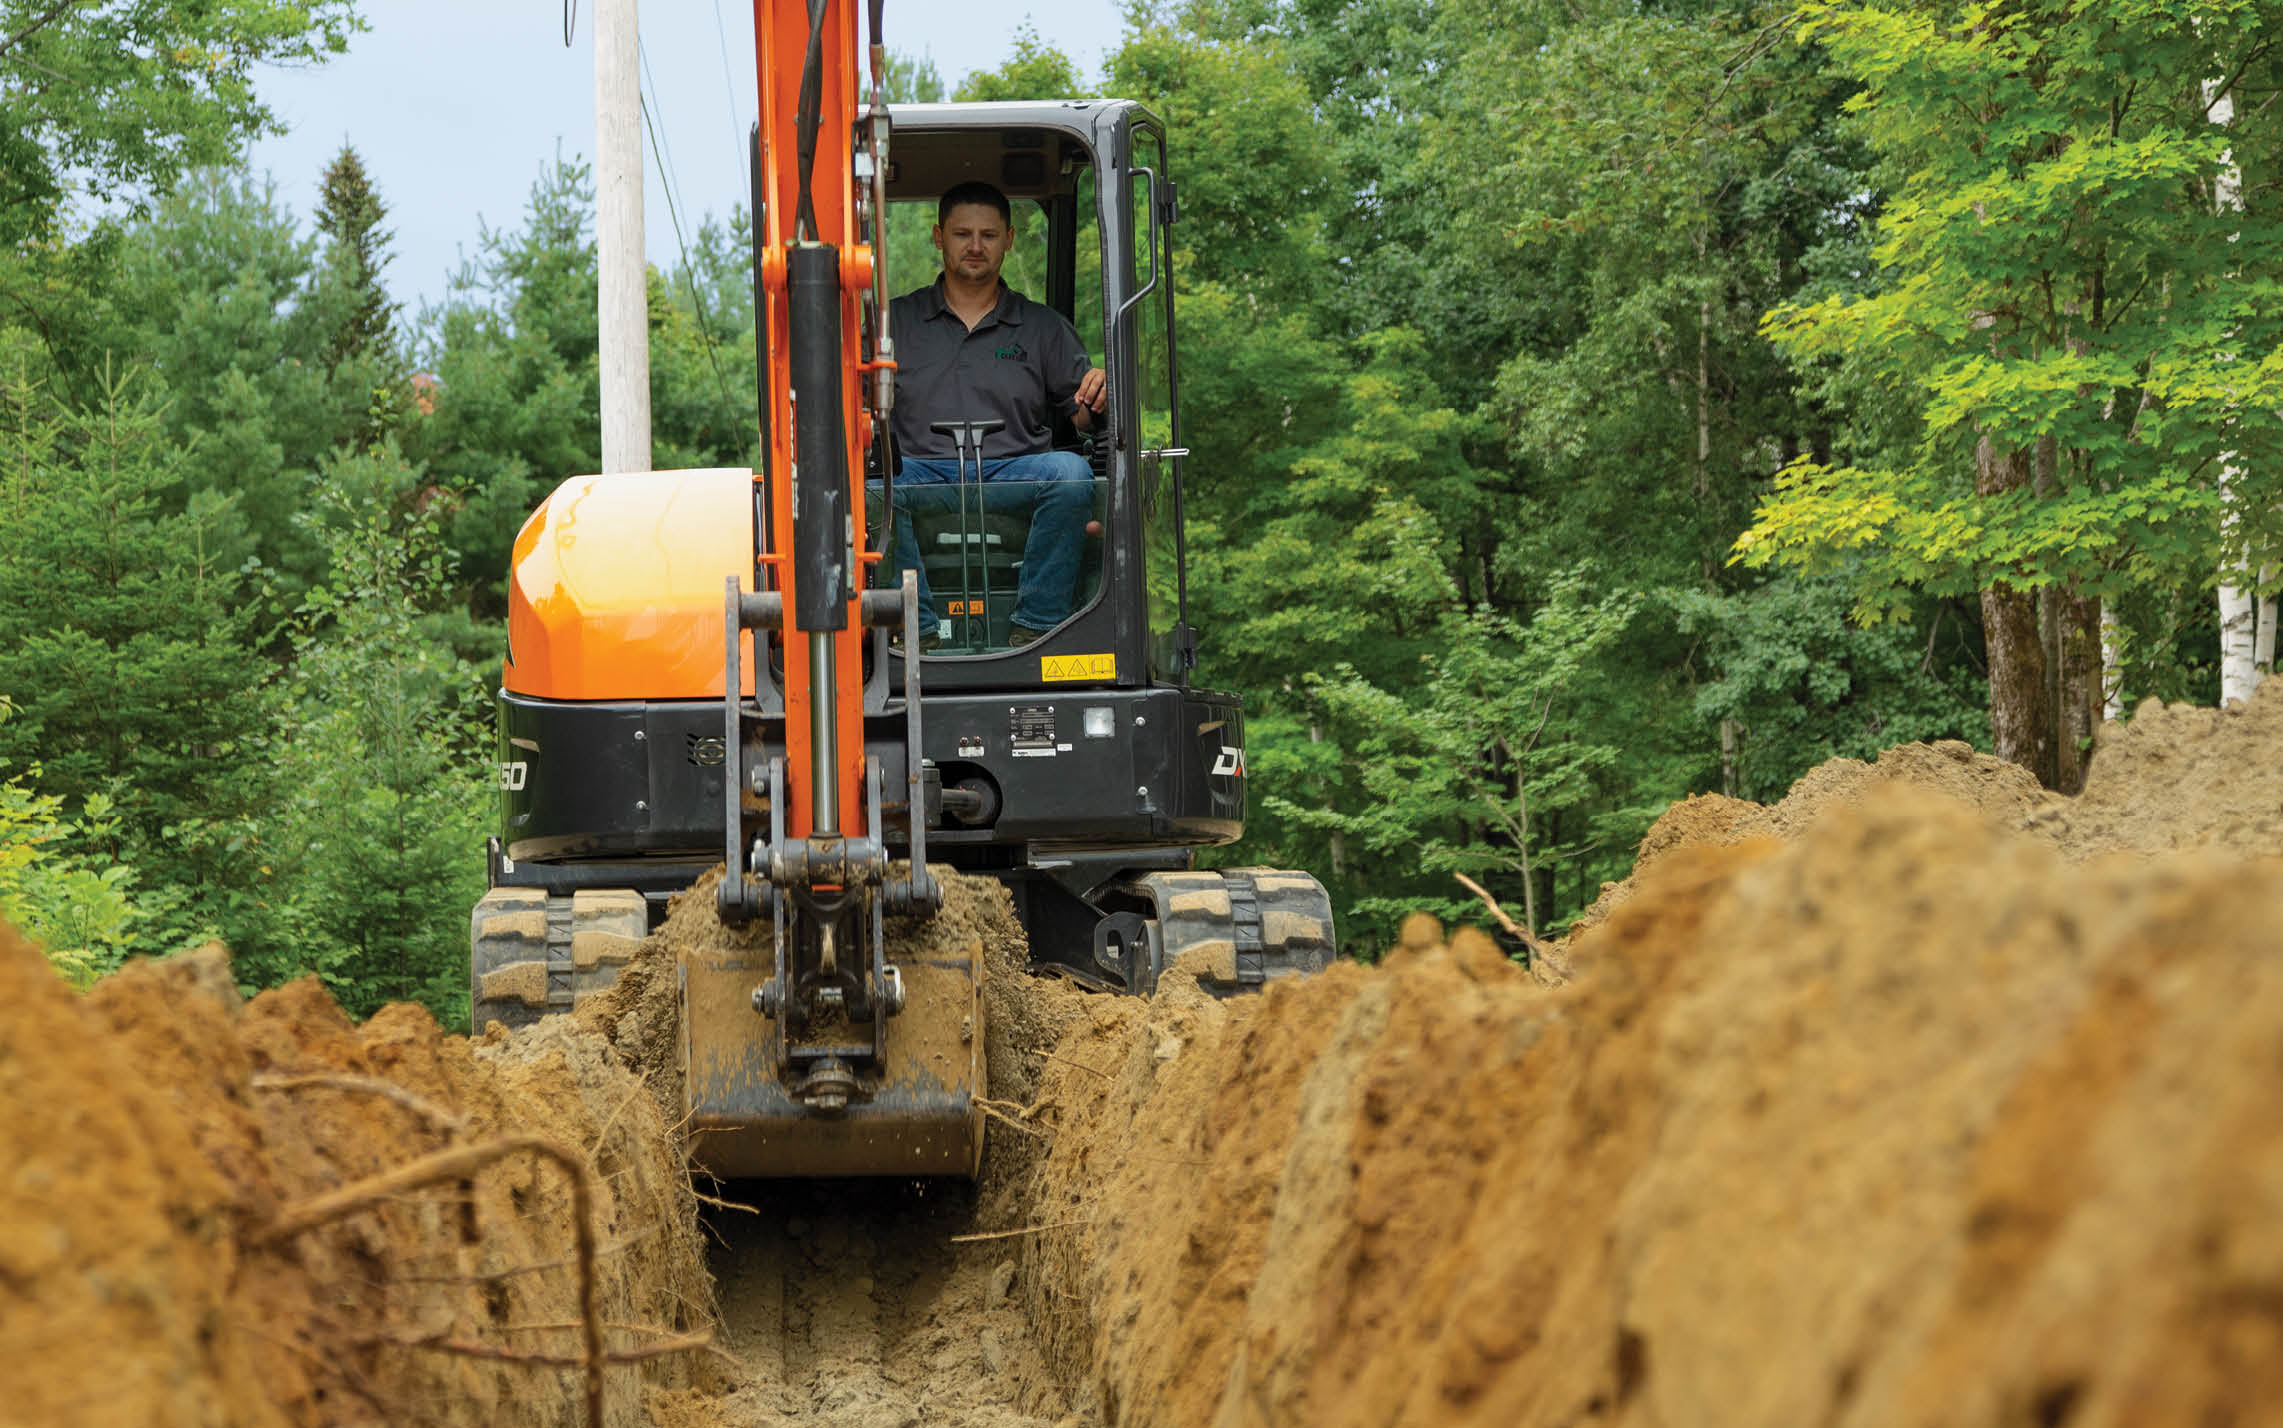 A Photo of Mike Hassett, Owner of Green State Excavating, Digging a Trench With His Doosan DX50-5 Mini Excavator.